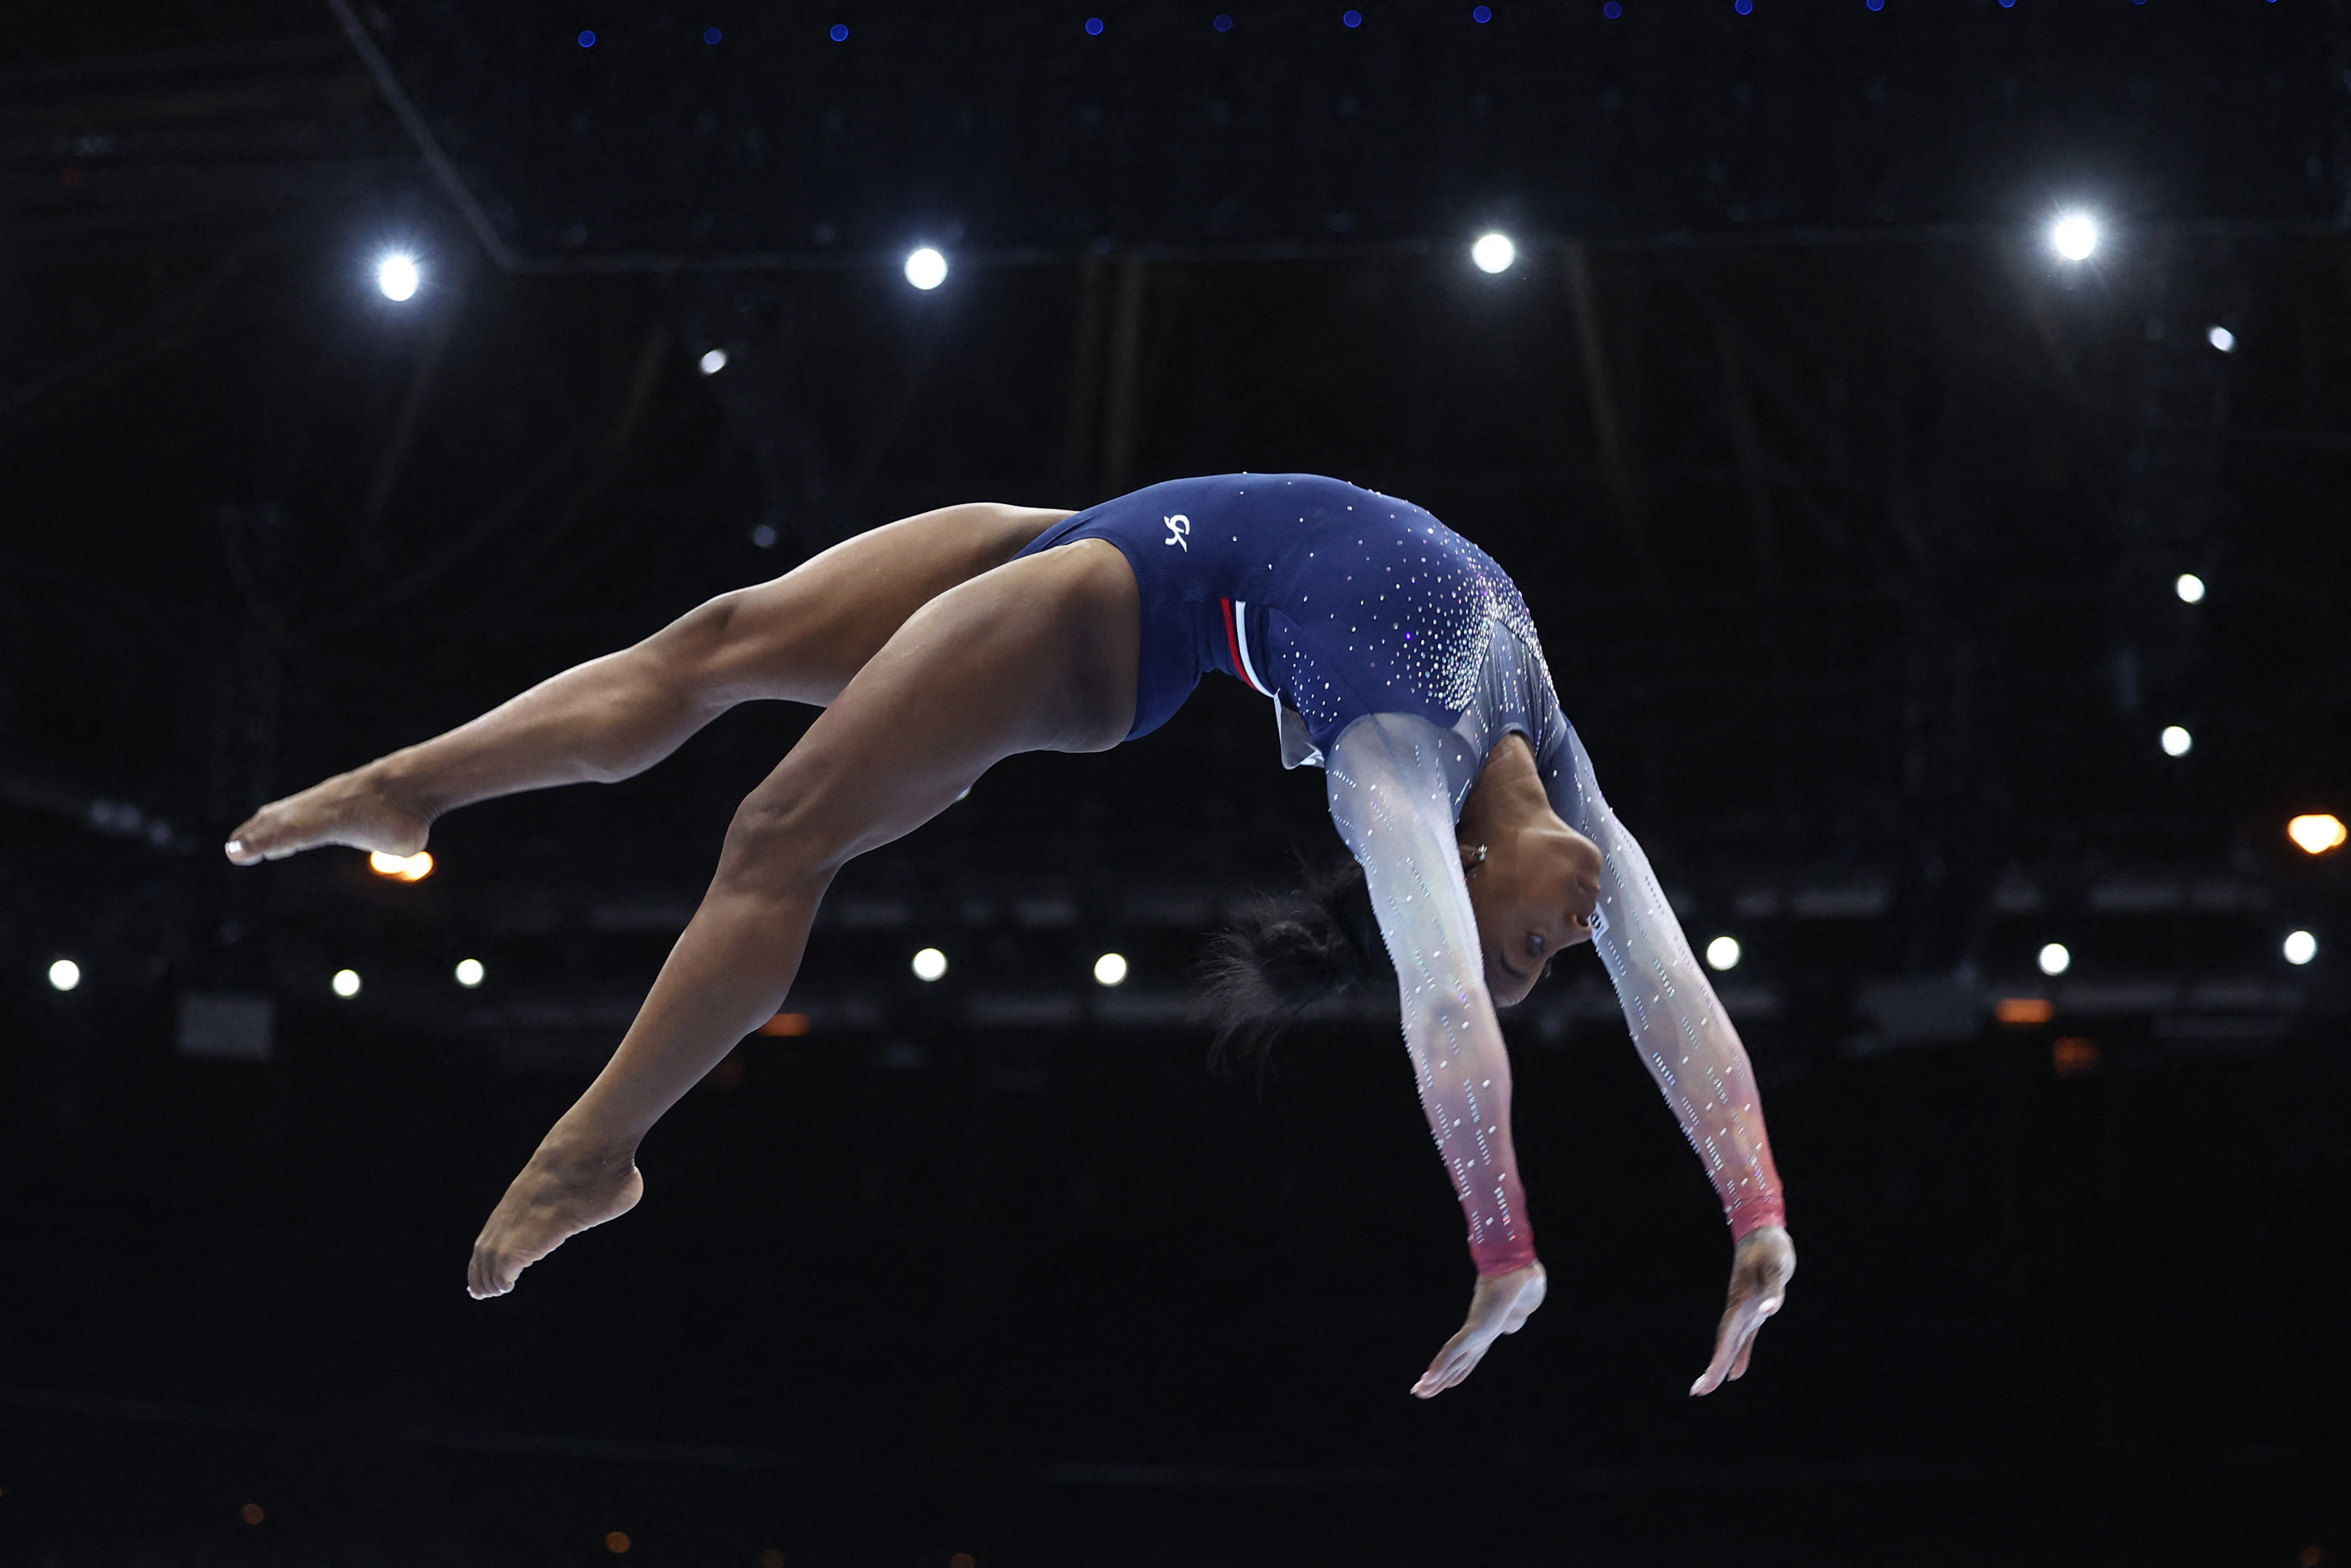 World Gymnastics Championships 2023: Team USA claims victory in